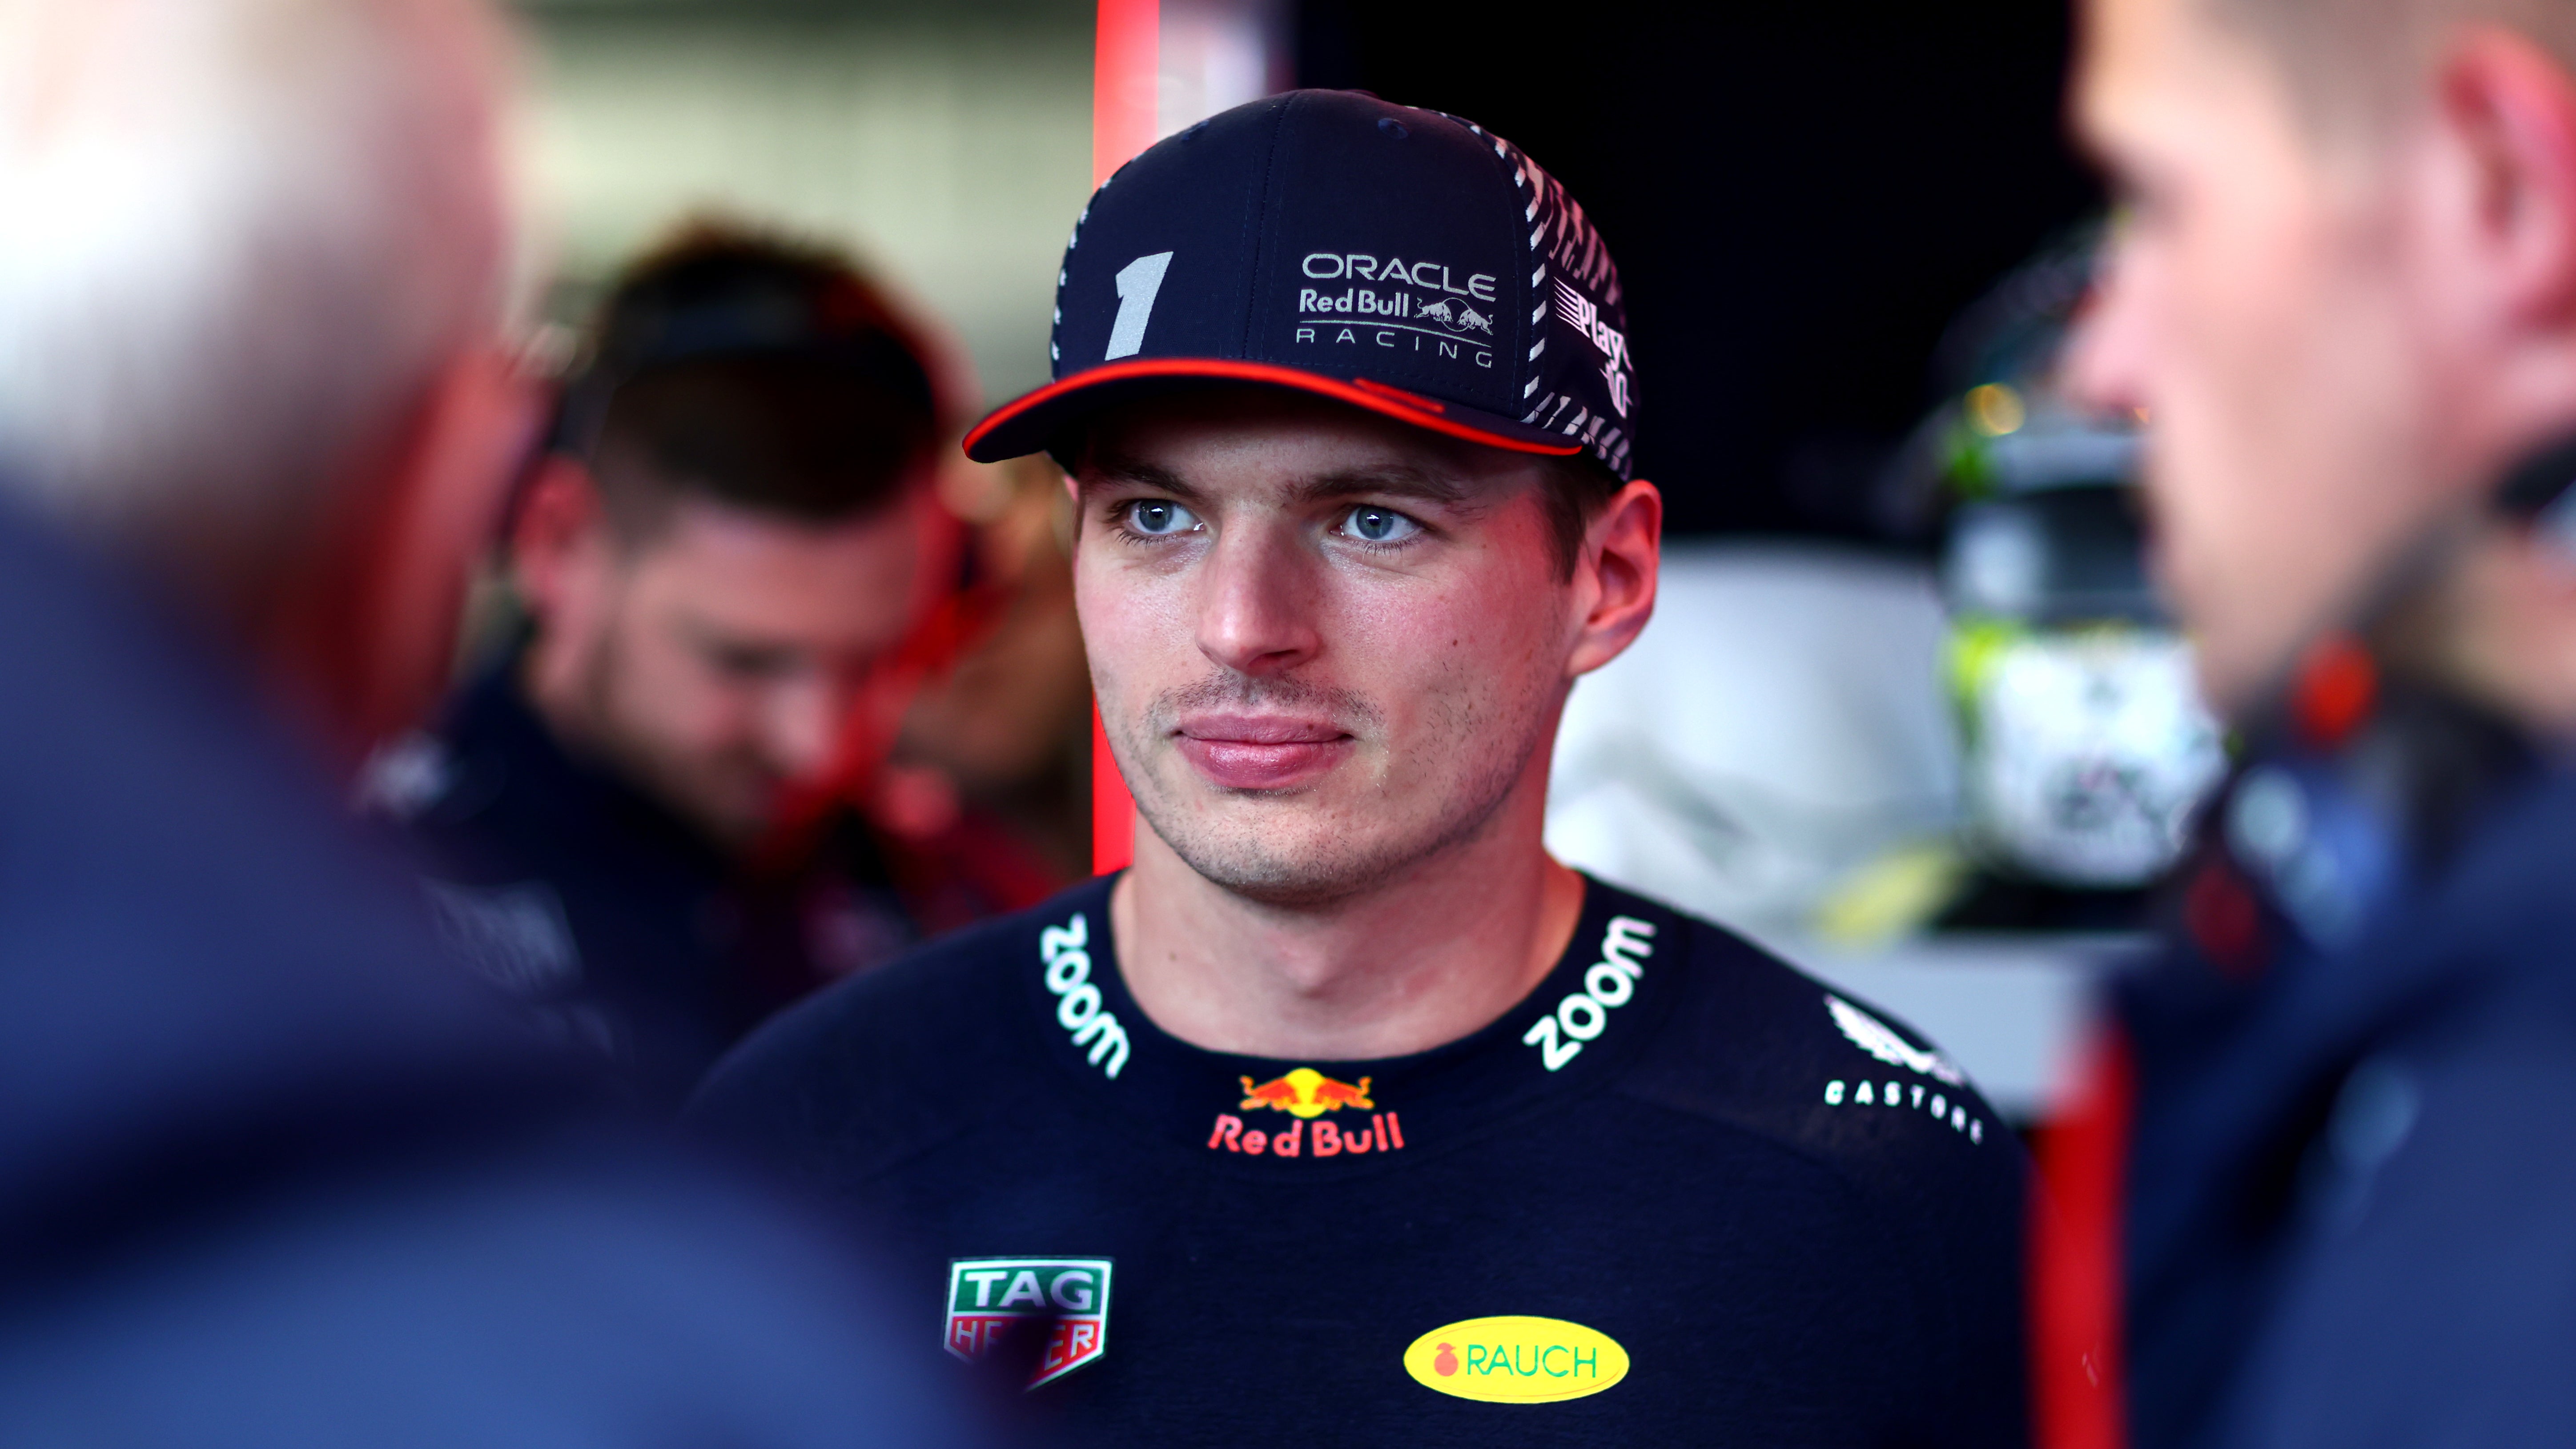 Max Verstappen compared the Las Vegas Grand Prix circuit to the National League after qualifying on Saturday